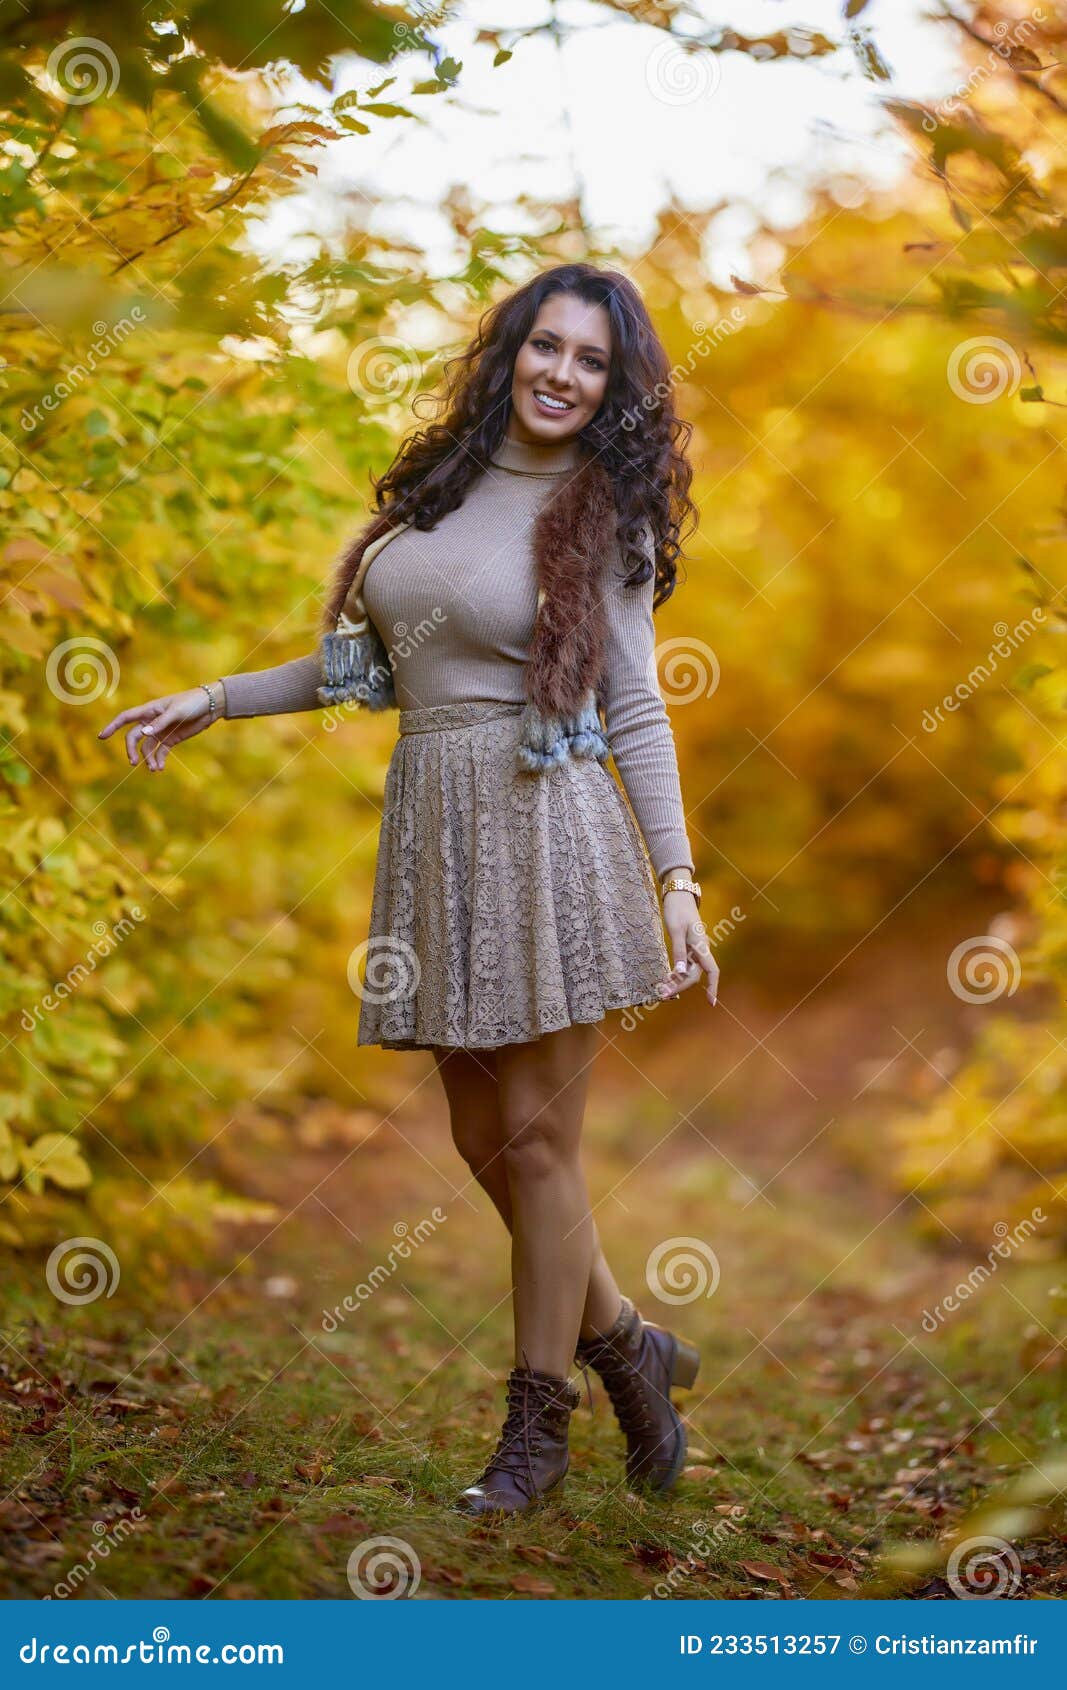 Portrait of a Beautiful Woman in the Woods Stock Image - Image of park ...